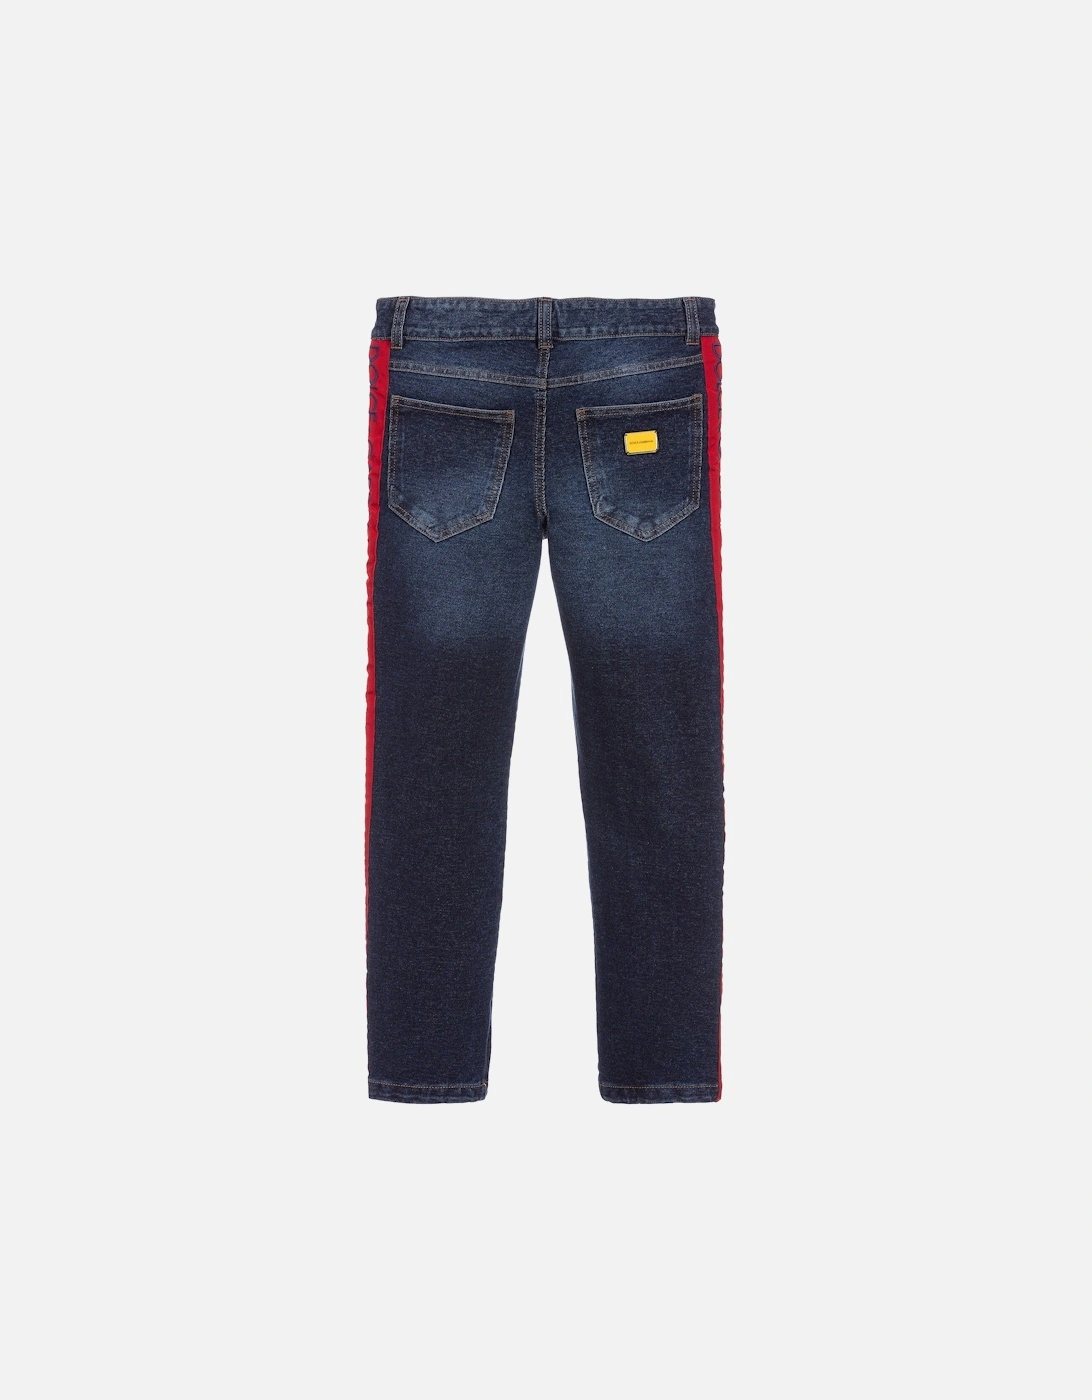 Boys Panel Jeans Blue & Red